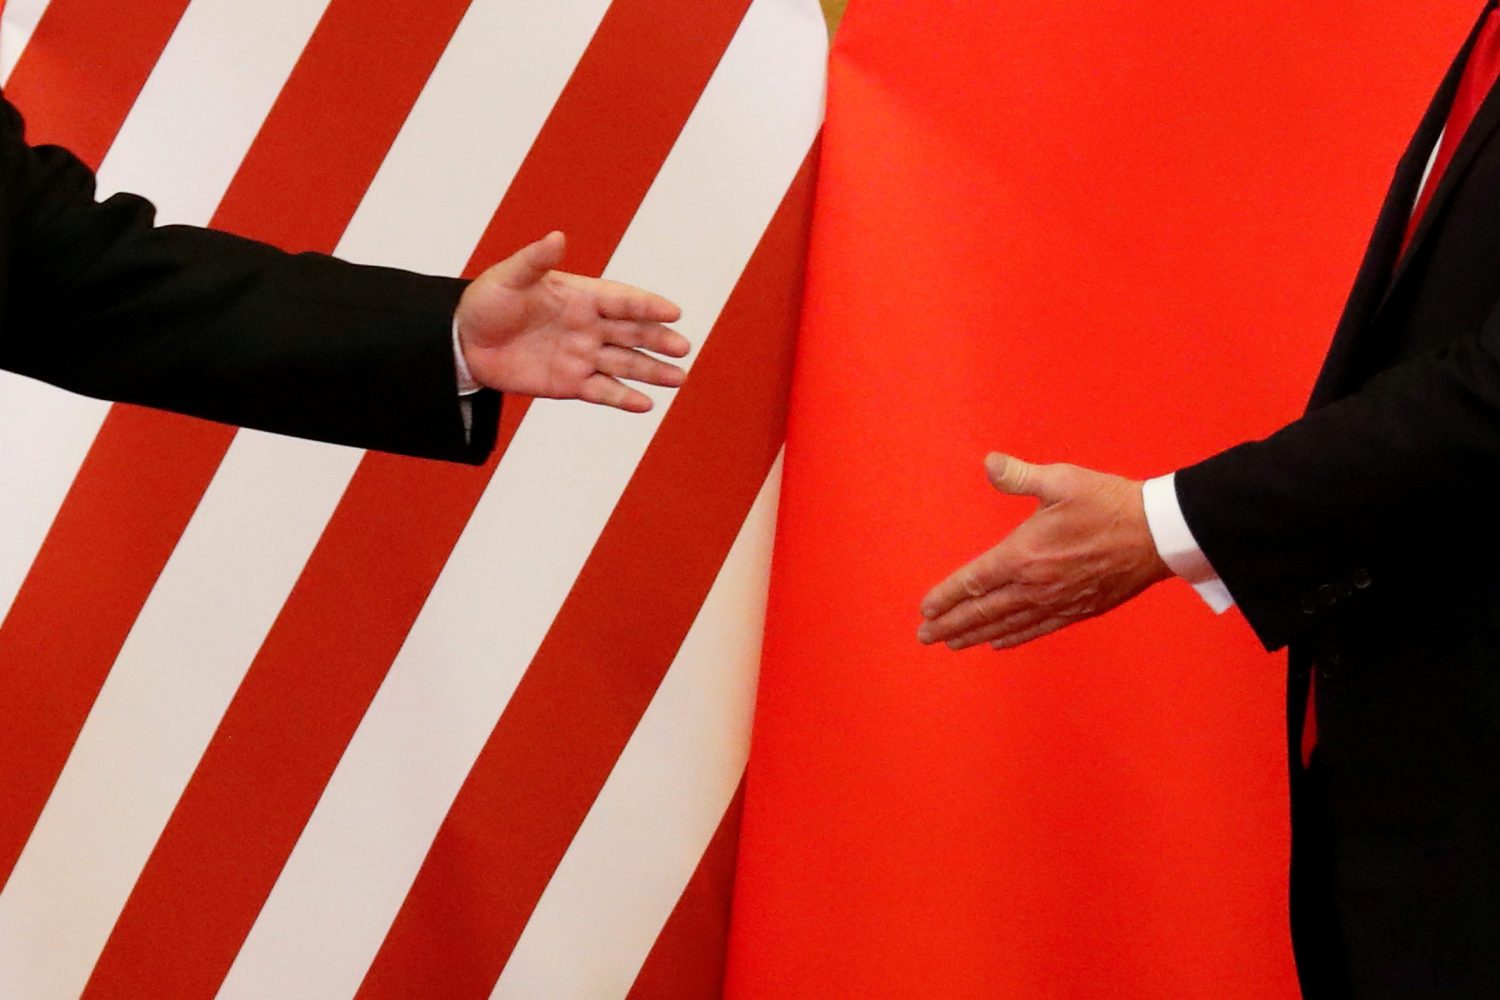 U.S. President Donald Trump and China's President Xi Jinping shake hands after making joint statements at the Great Hall of the People in Beijing, China, November 9, 2017. Damir Sagolj: "It's one of those "how to make a better or at least different shot when two presidents shake hands several times a day, several days in row". If I'm not mistaken in calculation, presidents Xi Jinping of China and Donald Trump of the U.S. shook their hands at least six times in events I covered during Trump's recent visit to China. I would imagine there were some more handshakes I haven't seen but other photographers did. And they all look similar - two big men, smiling and heartily greeting each other until everyone gets their shot. But then there is always something that can make it special - in this case the background made of U.S. and Chinese flags. They shook hands twice in front of it, and the first time it didn't work for me. The second time I positioned myself lower and centrally, and used the longest lens I have to capture only hands reaching for a handshake." REUTERS/Damir Sagolj/File Photo  SEARCH "POY TRUMP" FOR THIS STORY. SEARCH "REUTERS POY" FOR ALL BEST OF 2017 PACKAGES.    TPX IMAGES OF THE DAY - RC1B1E5EF340